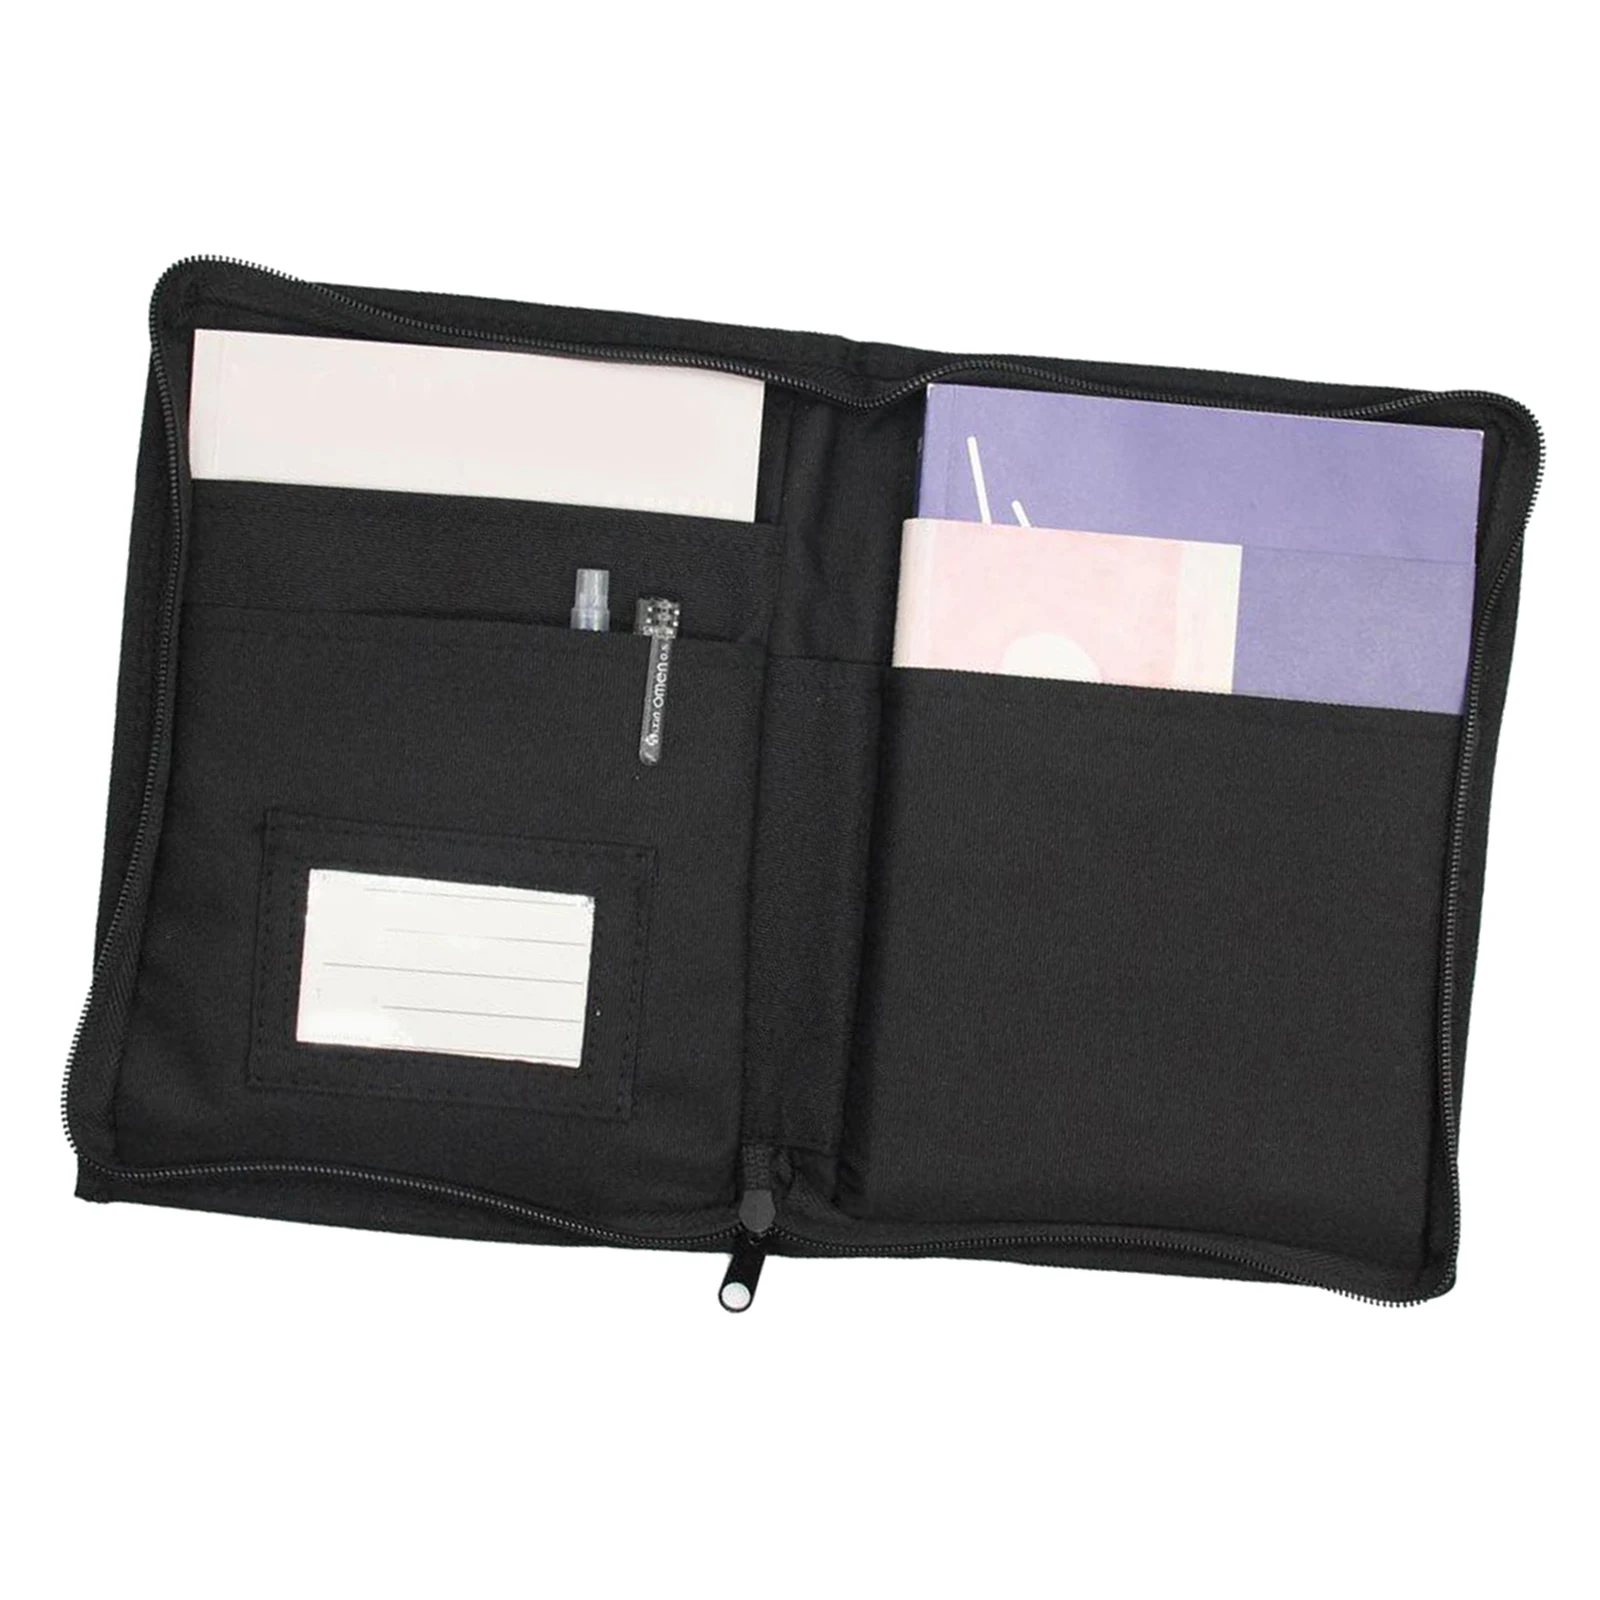 Car Registration and Insurance Documents Holder Vehicle Glove Box Wallet Case